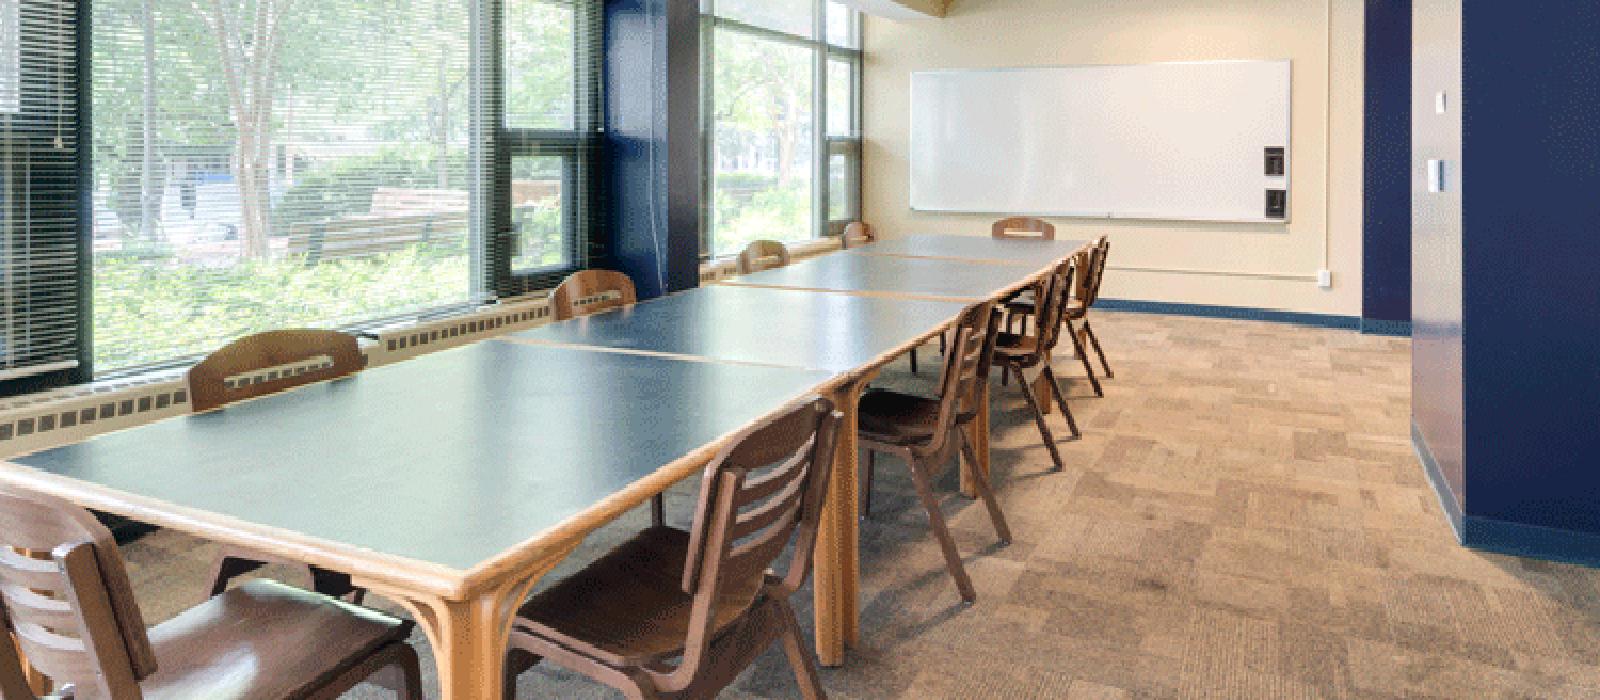 Meeting room with table, chairs, and a white board. One side of the wall is made up of glass pane windows.